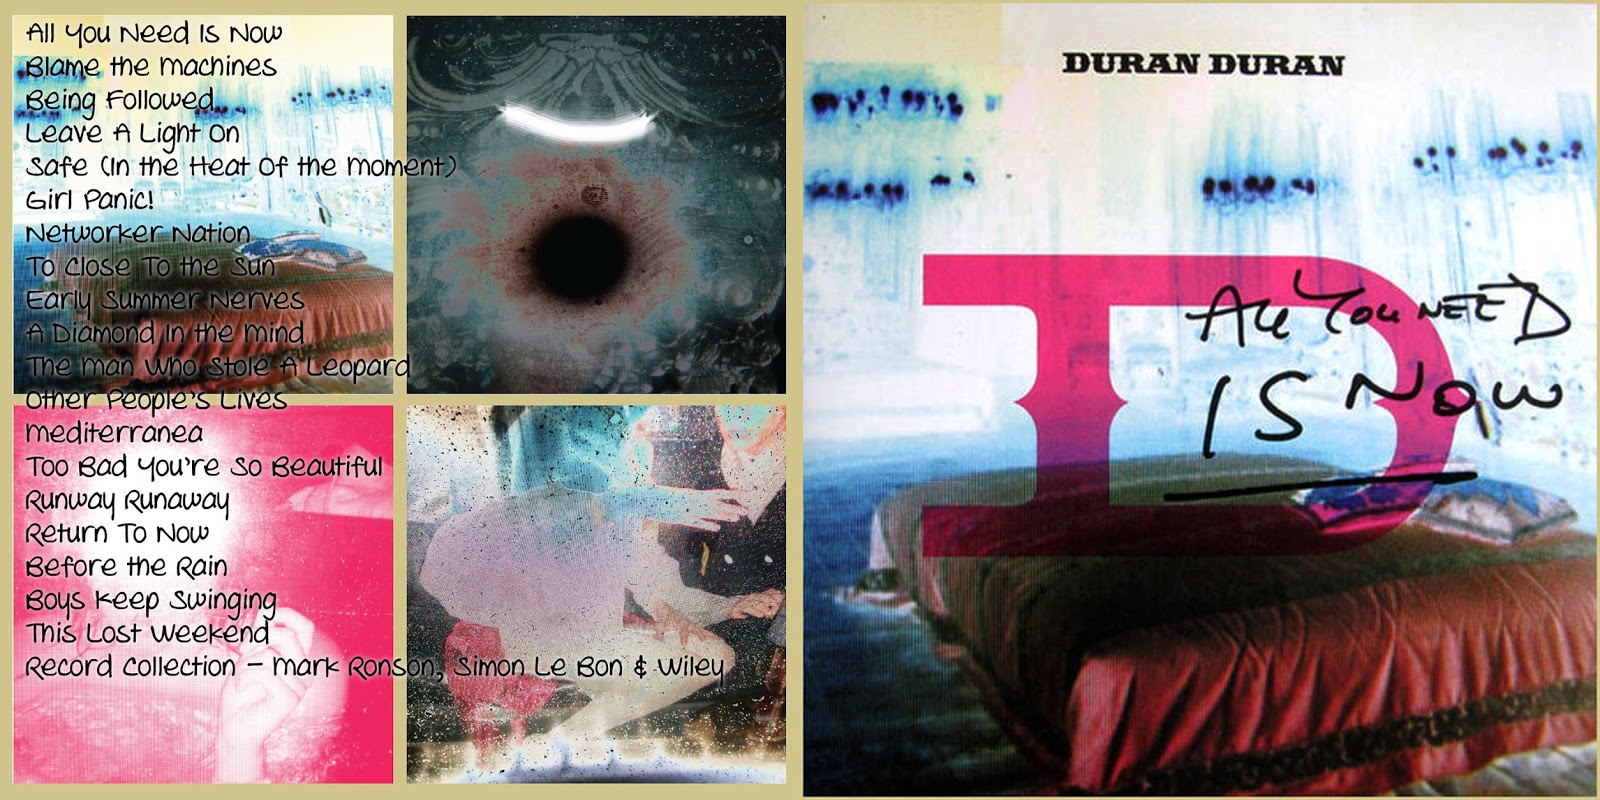 Duran Duran - All You Need Is Now CD, Album at Discogs